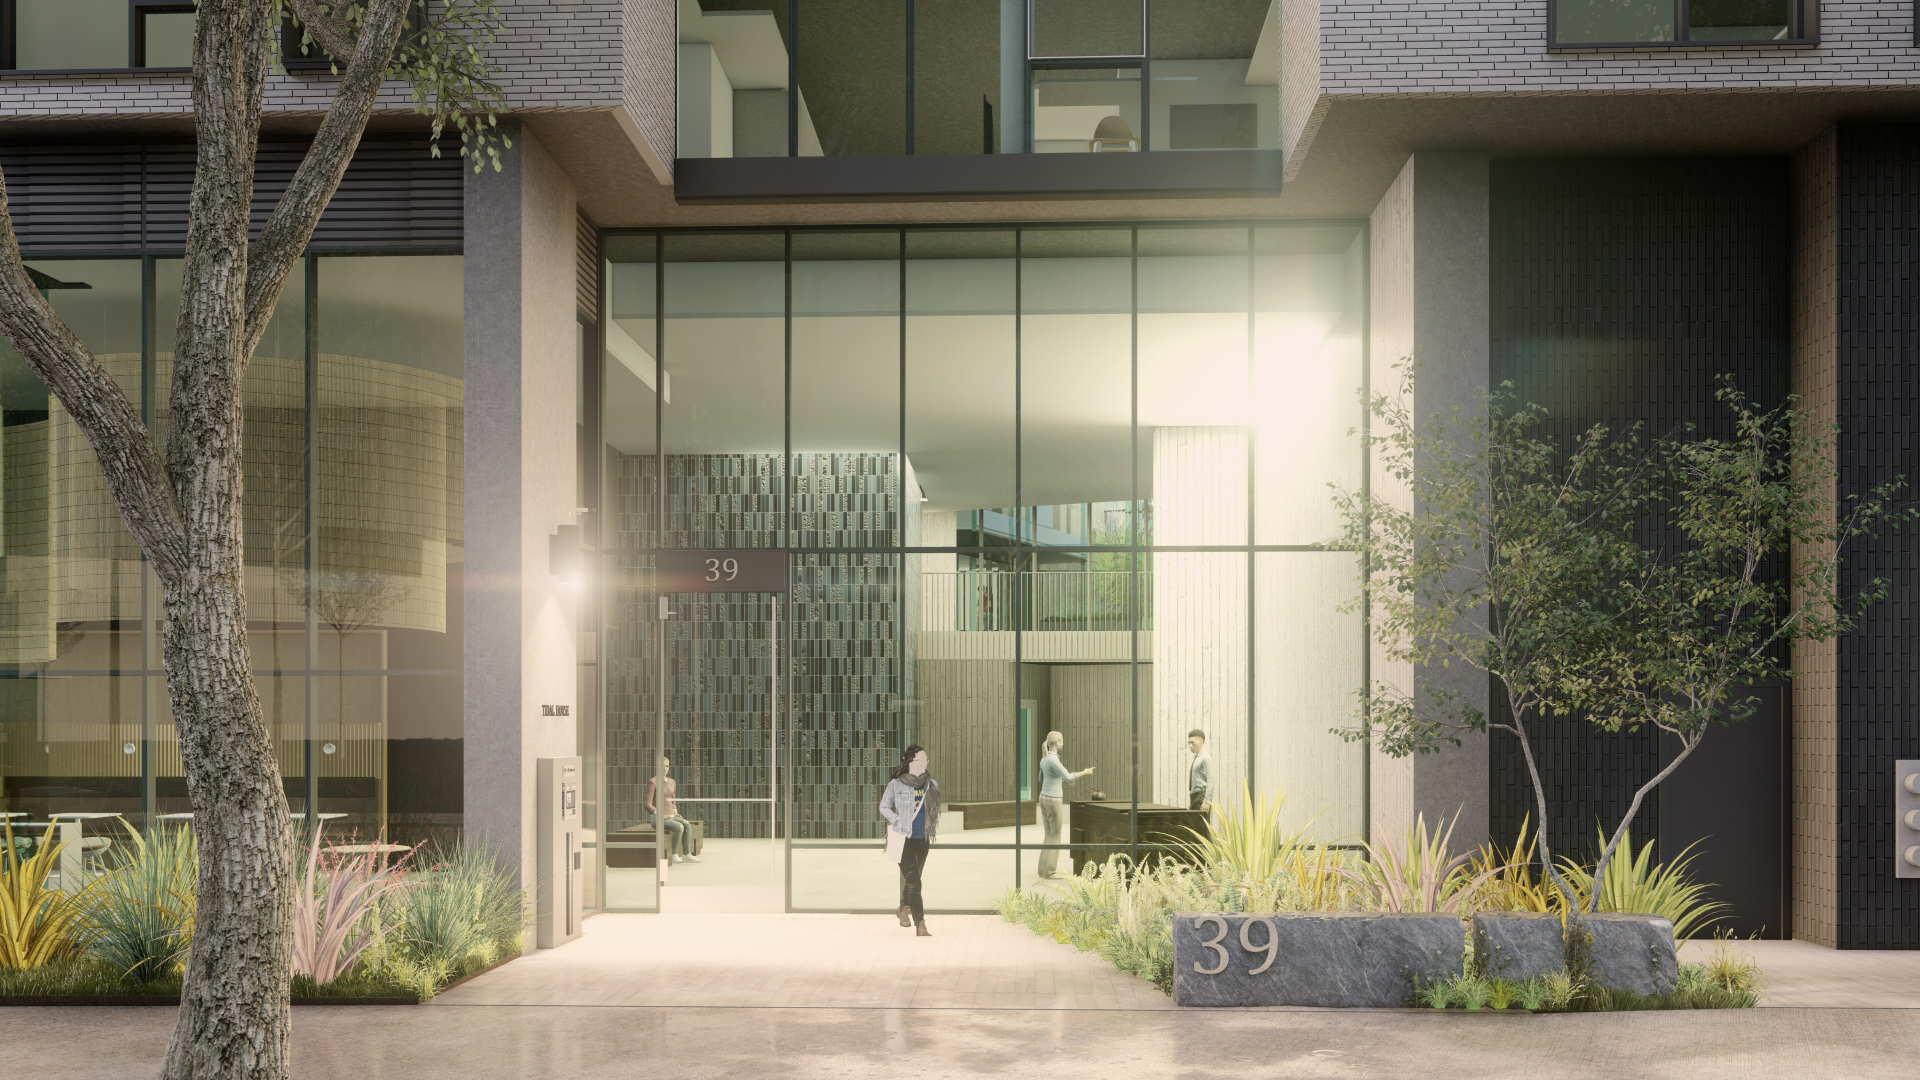 Rendering of the entrance to Tidal House in Treasure Island, San Francisco, Ca.